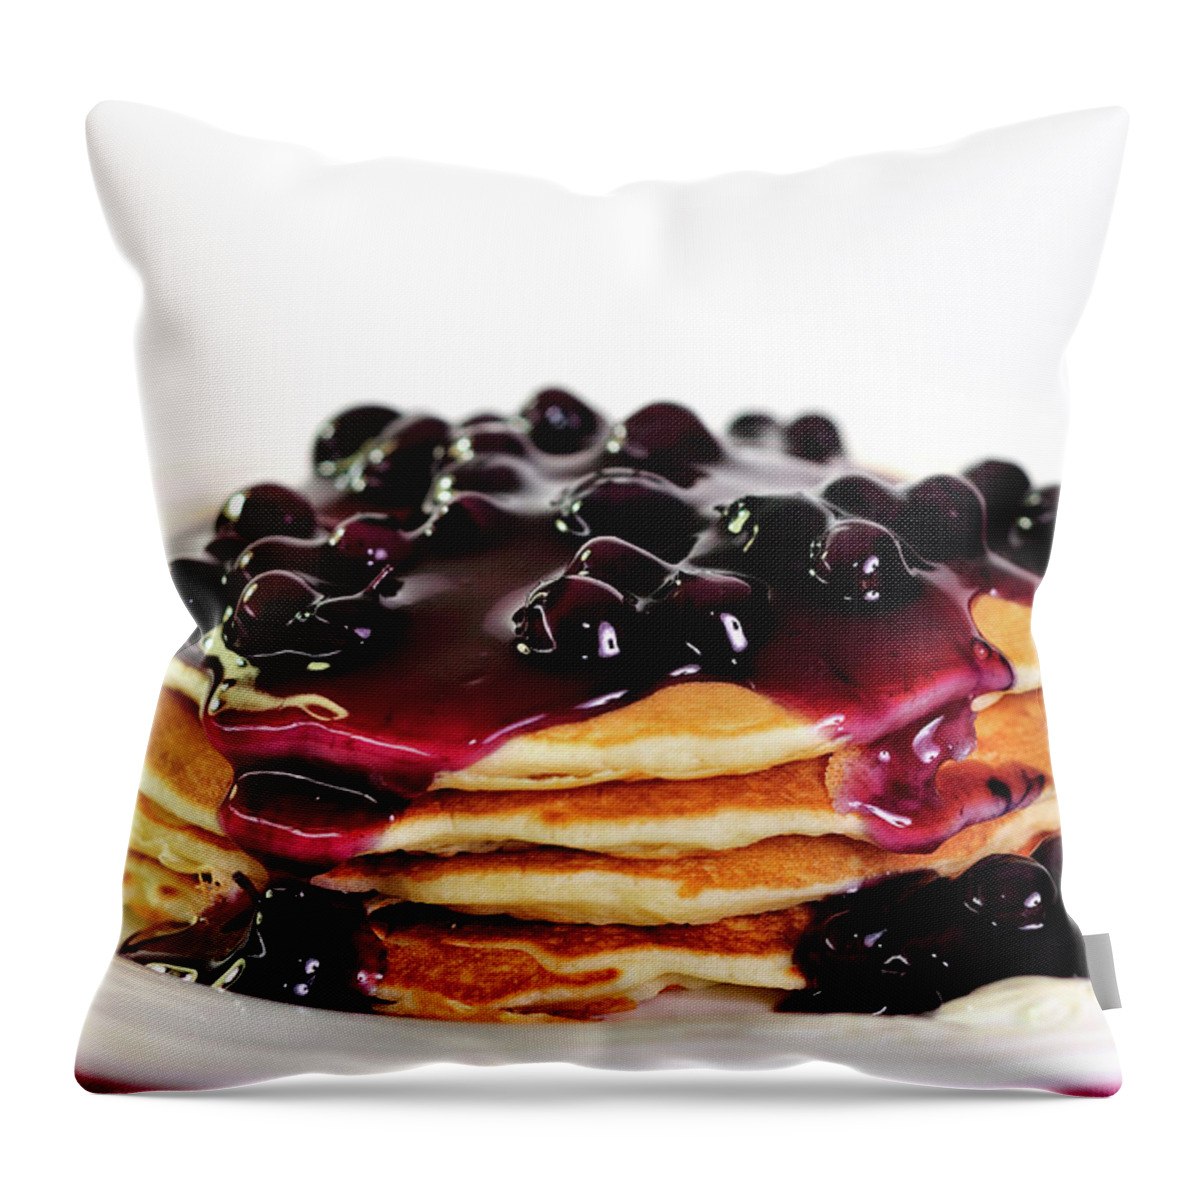 Blueberry Pancakes Throw Pillow featuring the photograph Blueberry Pancakes by Betty LaRue